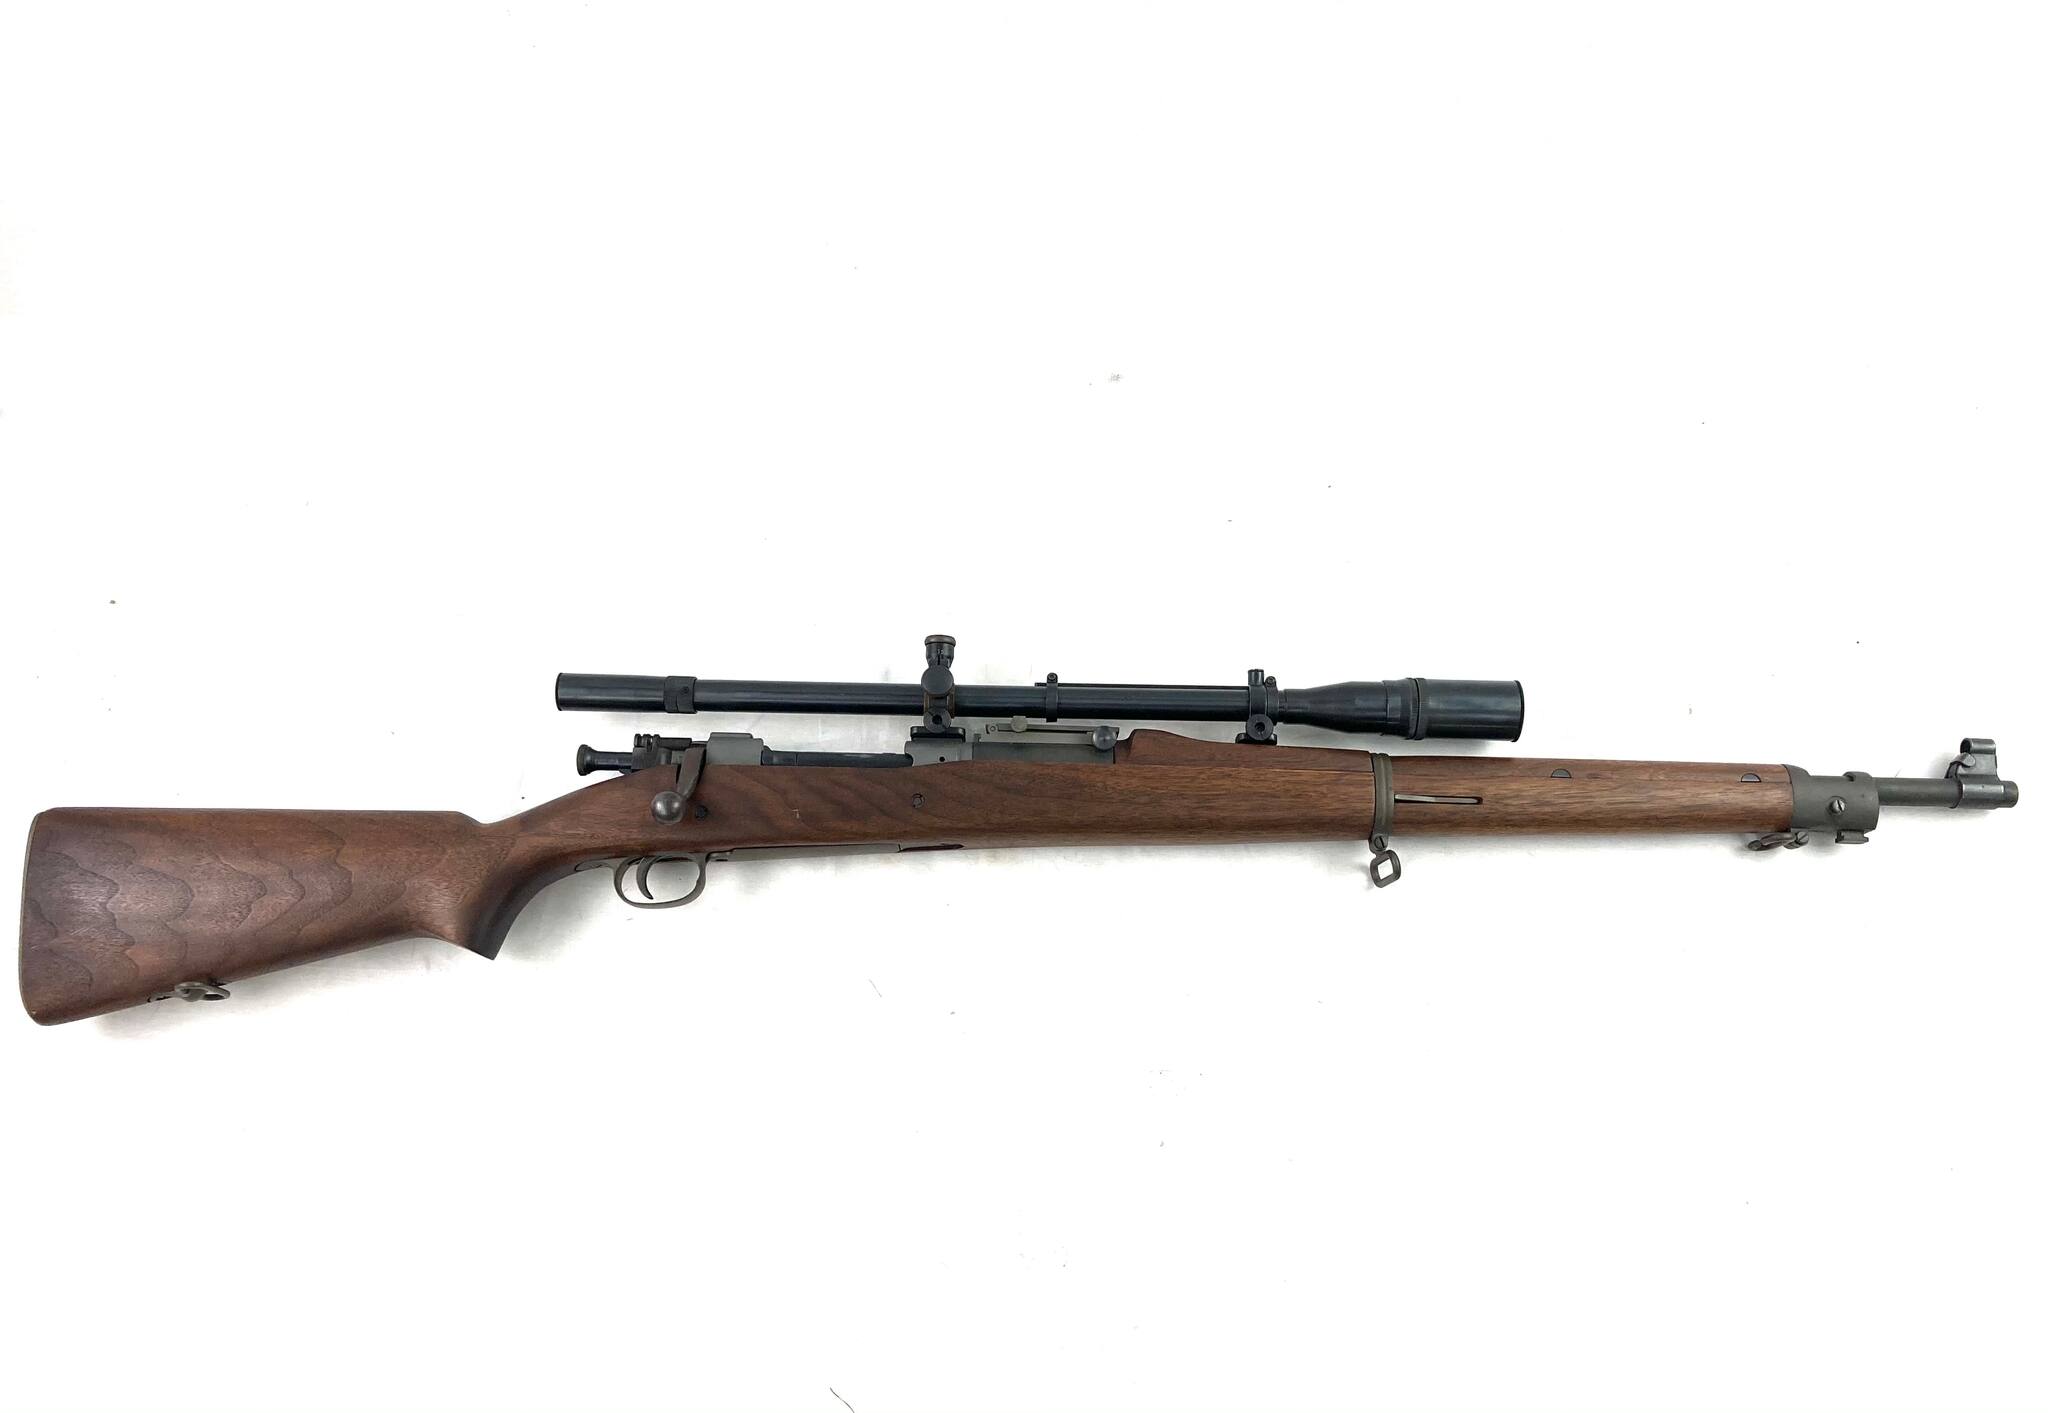 Image of SPRINGFIELD 1932 Manufactured Model 1903A3 USMC Sniper